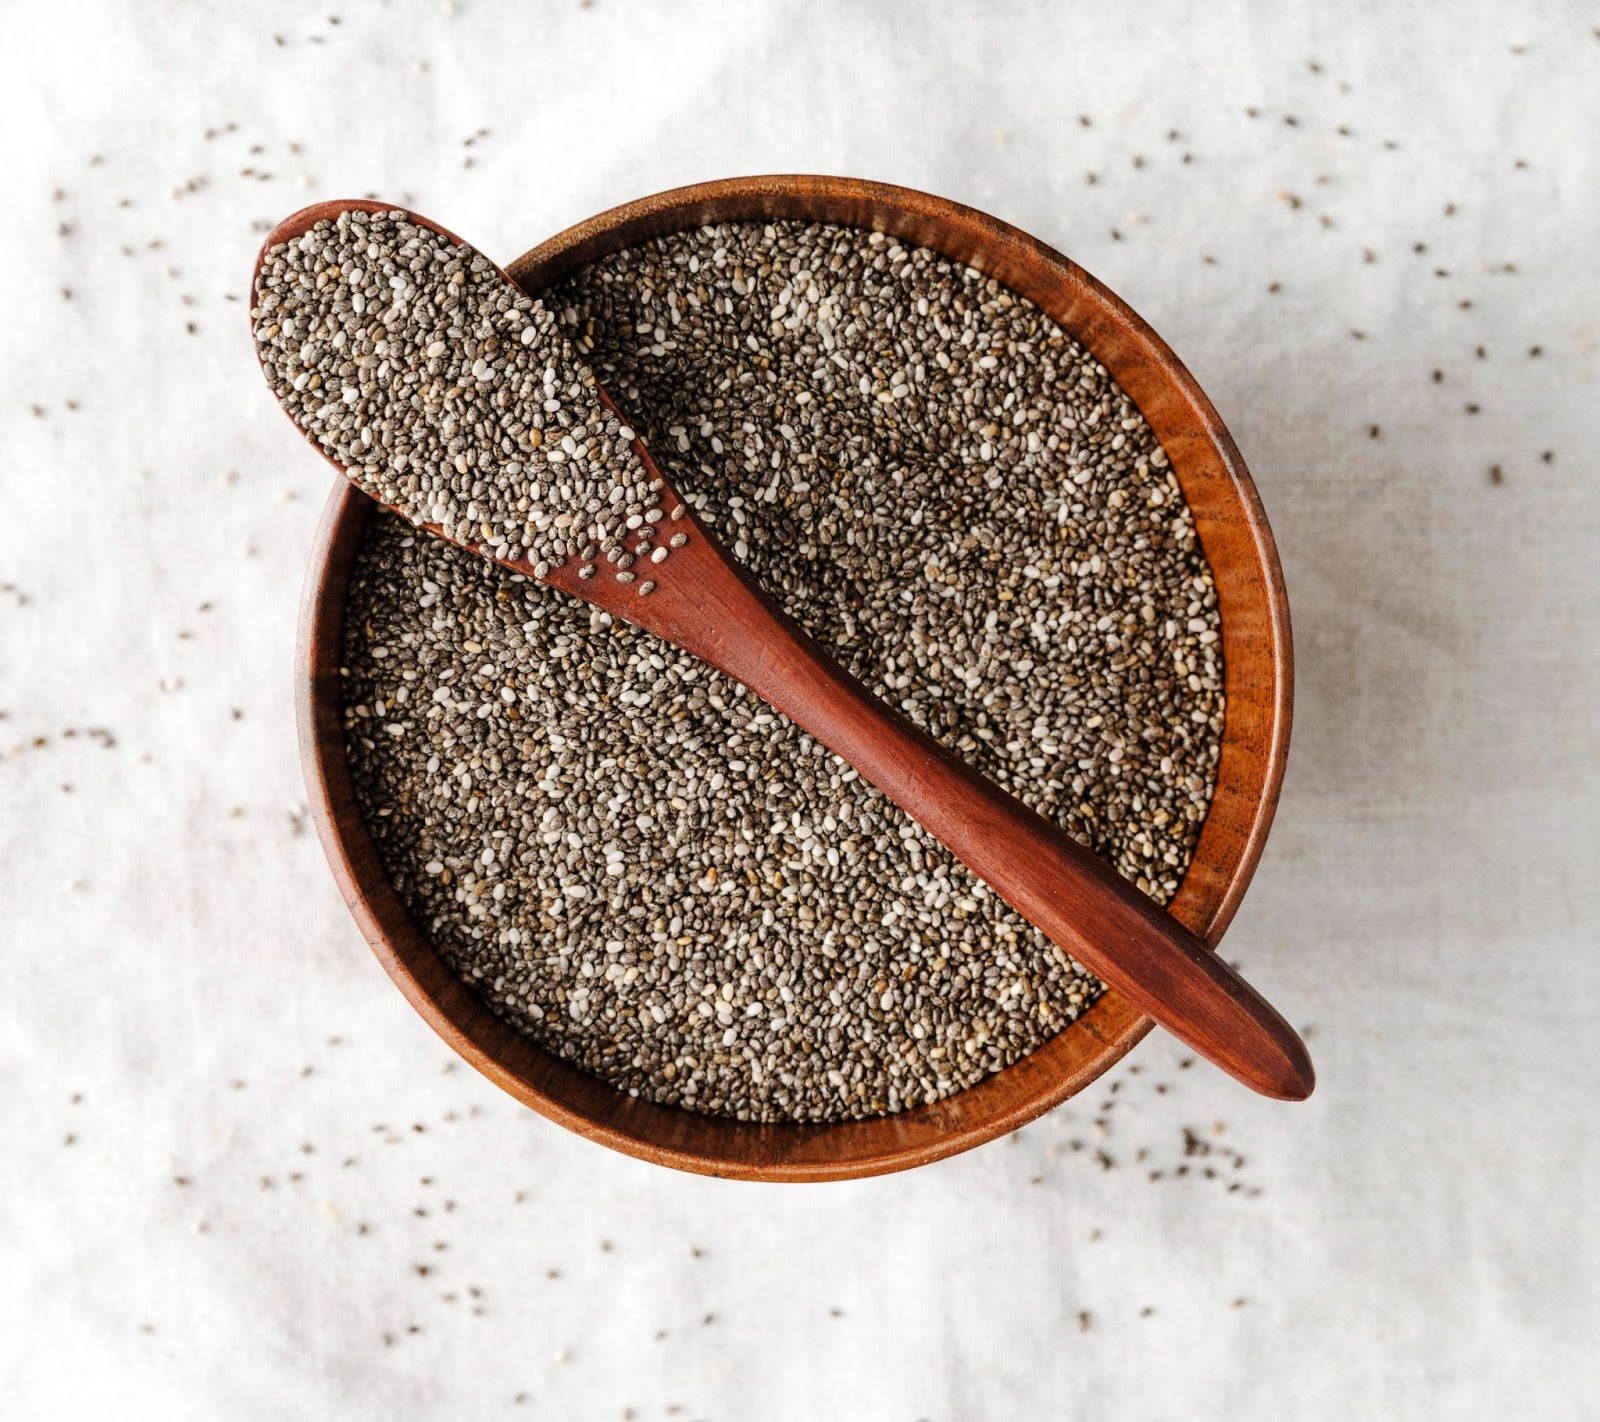 know how to eat chia seeds for weight loss